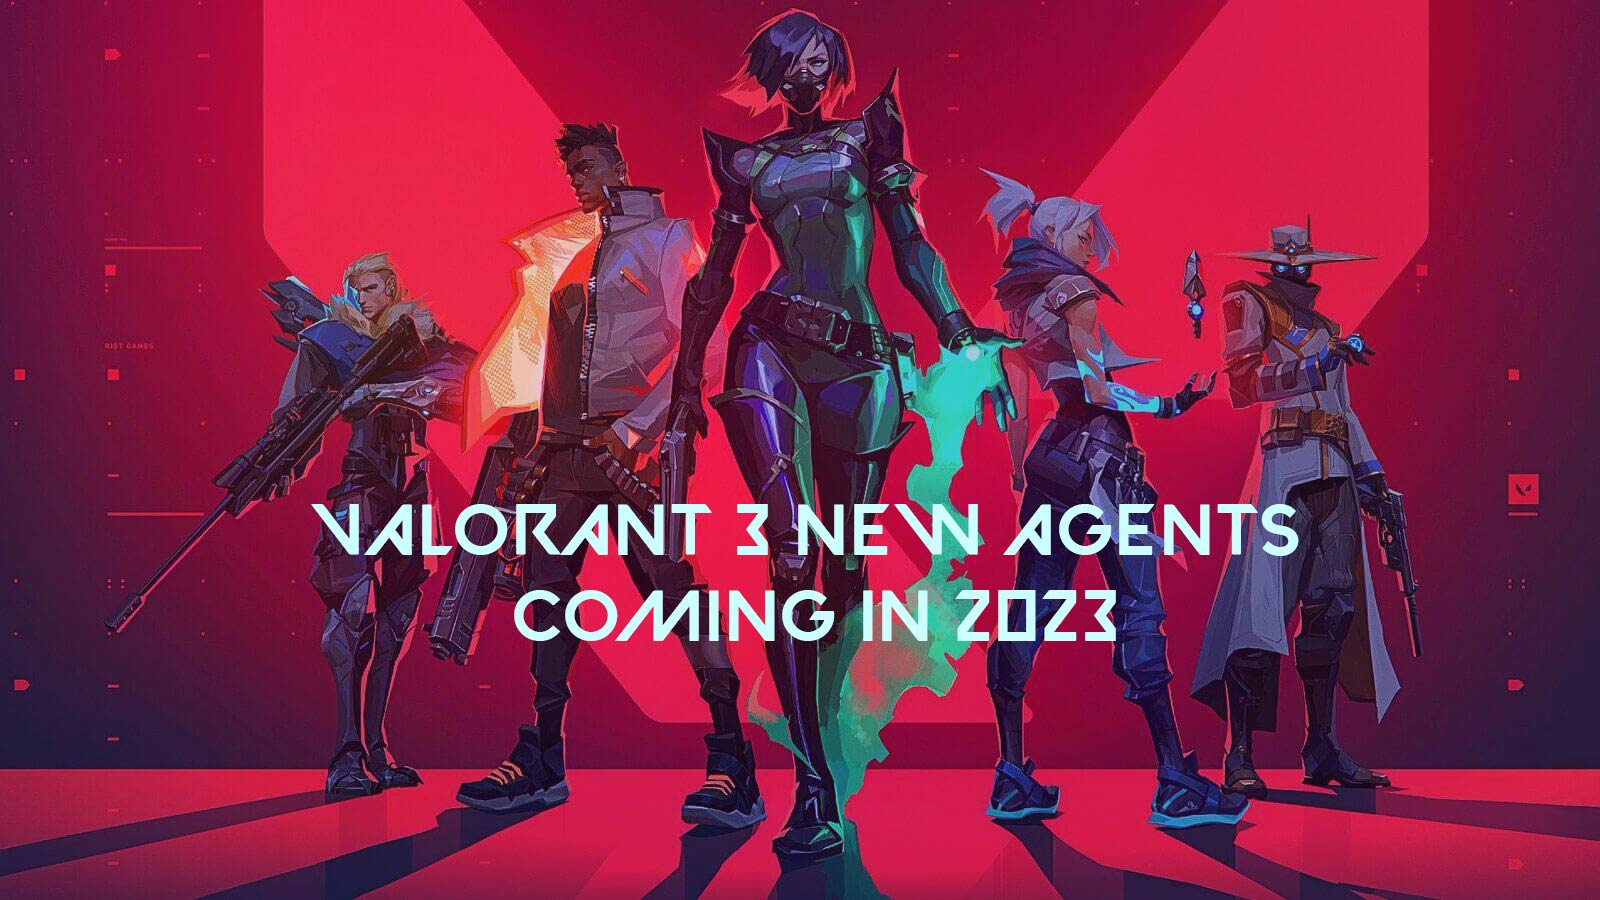 A Big Surprise From Riot: Valorant Will Add 3 in 2023